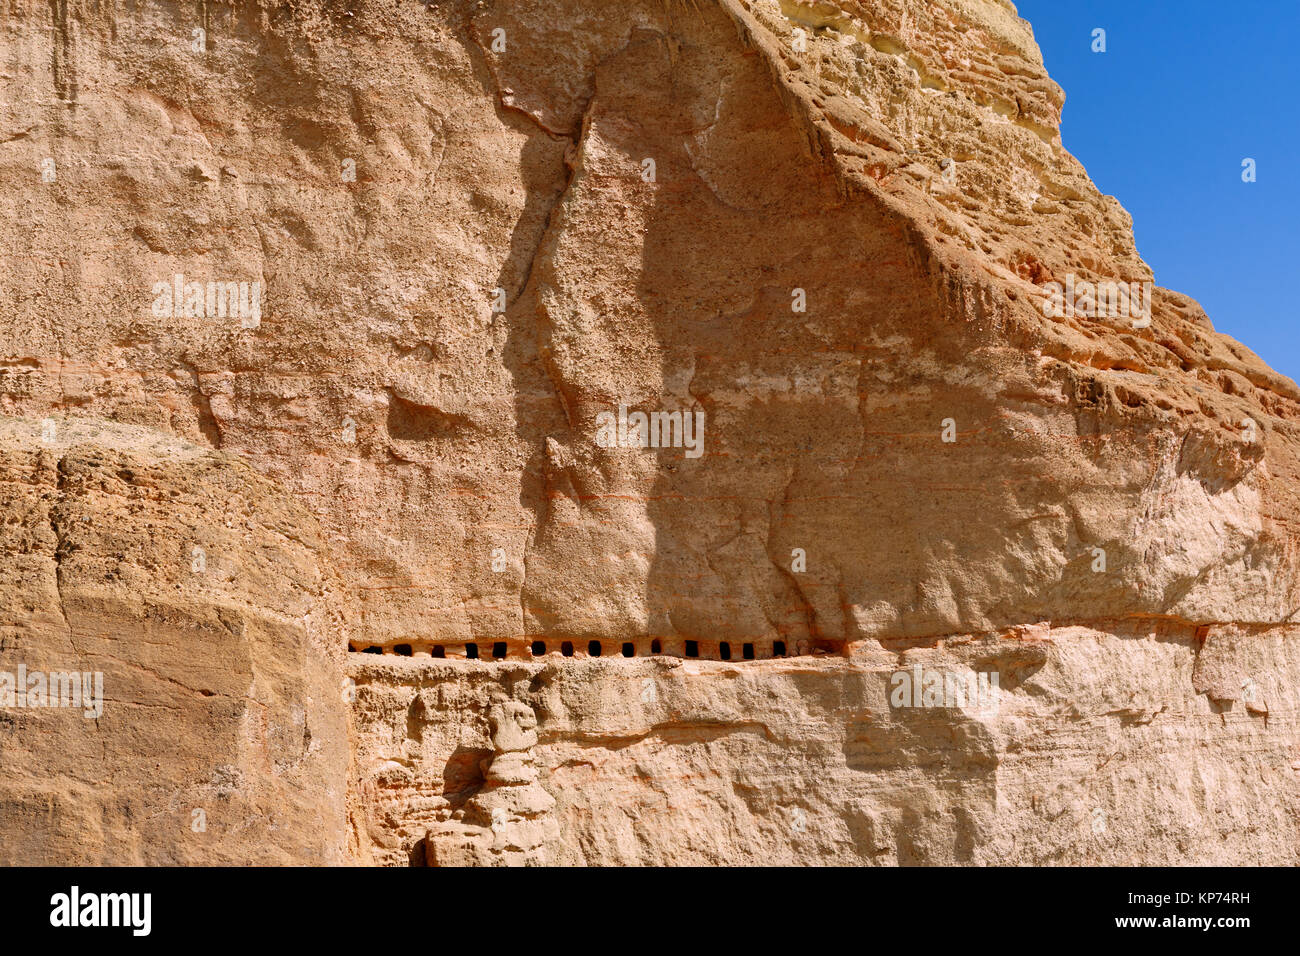 Row of cave dwellings carved in a cliff near Chele, Upper Mustang region, Nepal. Stock Photo